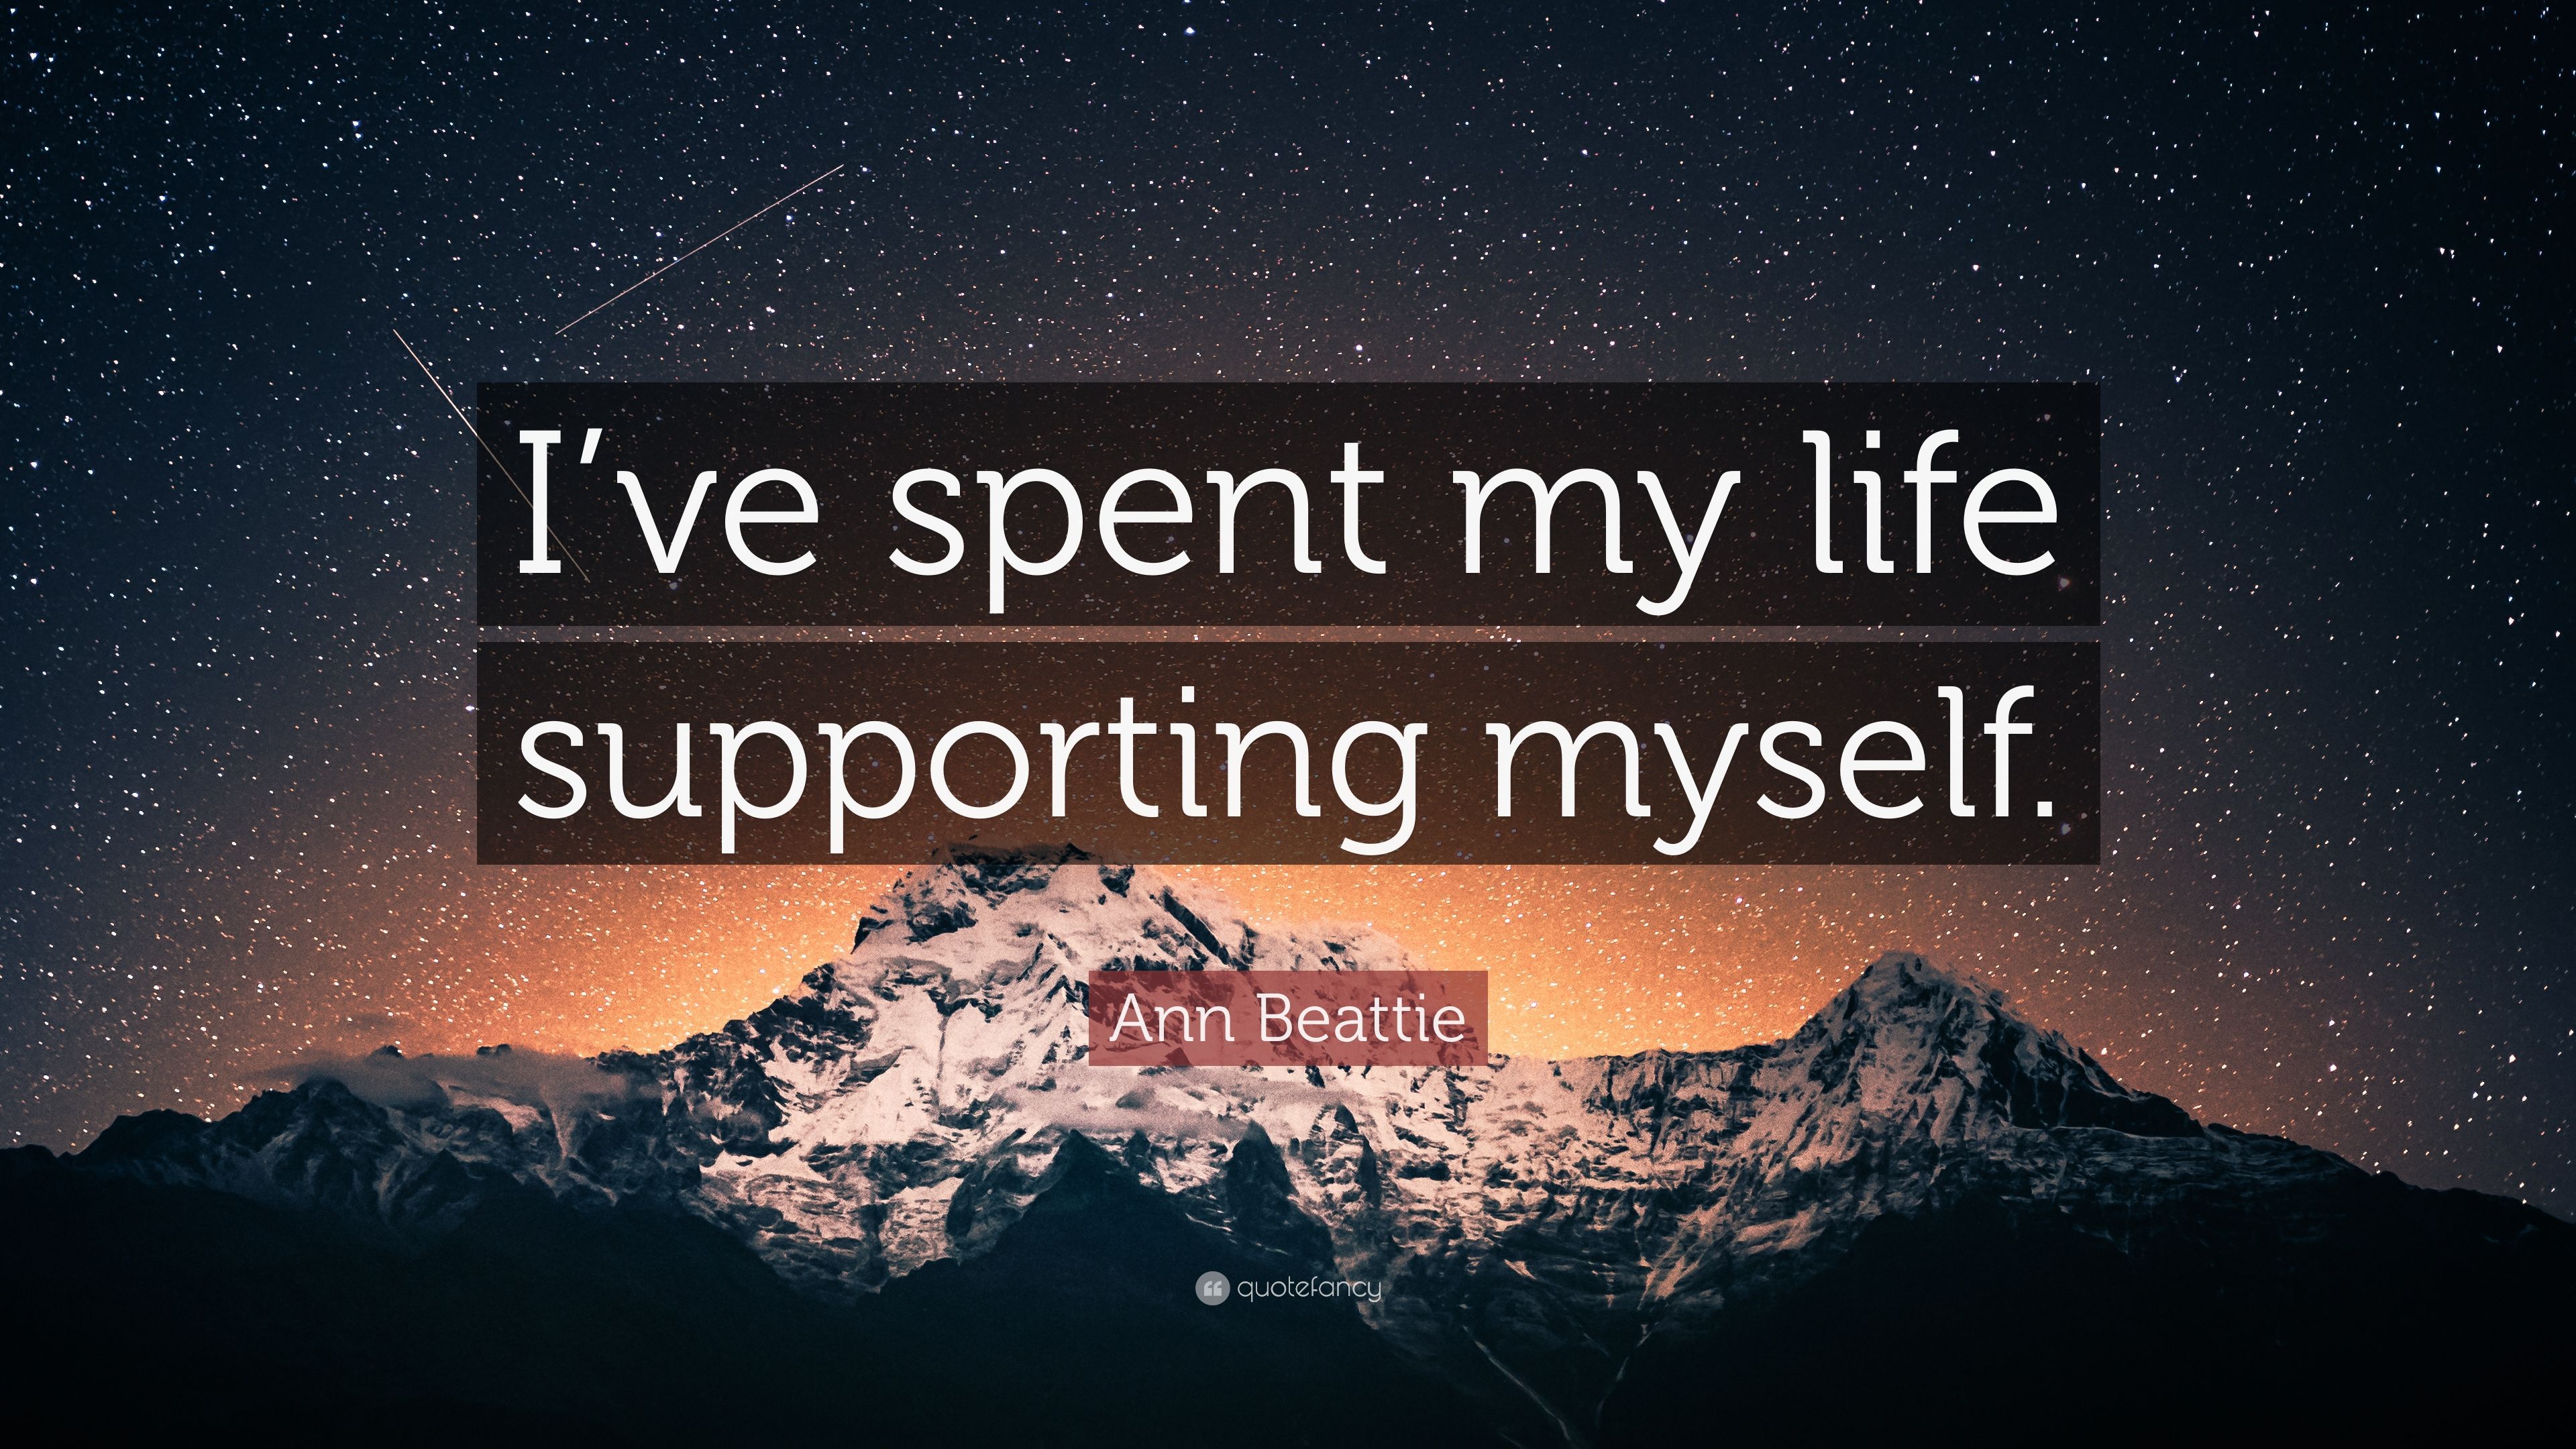 Ann Beattie Quote: “I've spent my life supporting myself.” 7